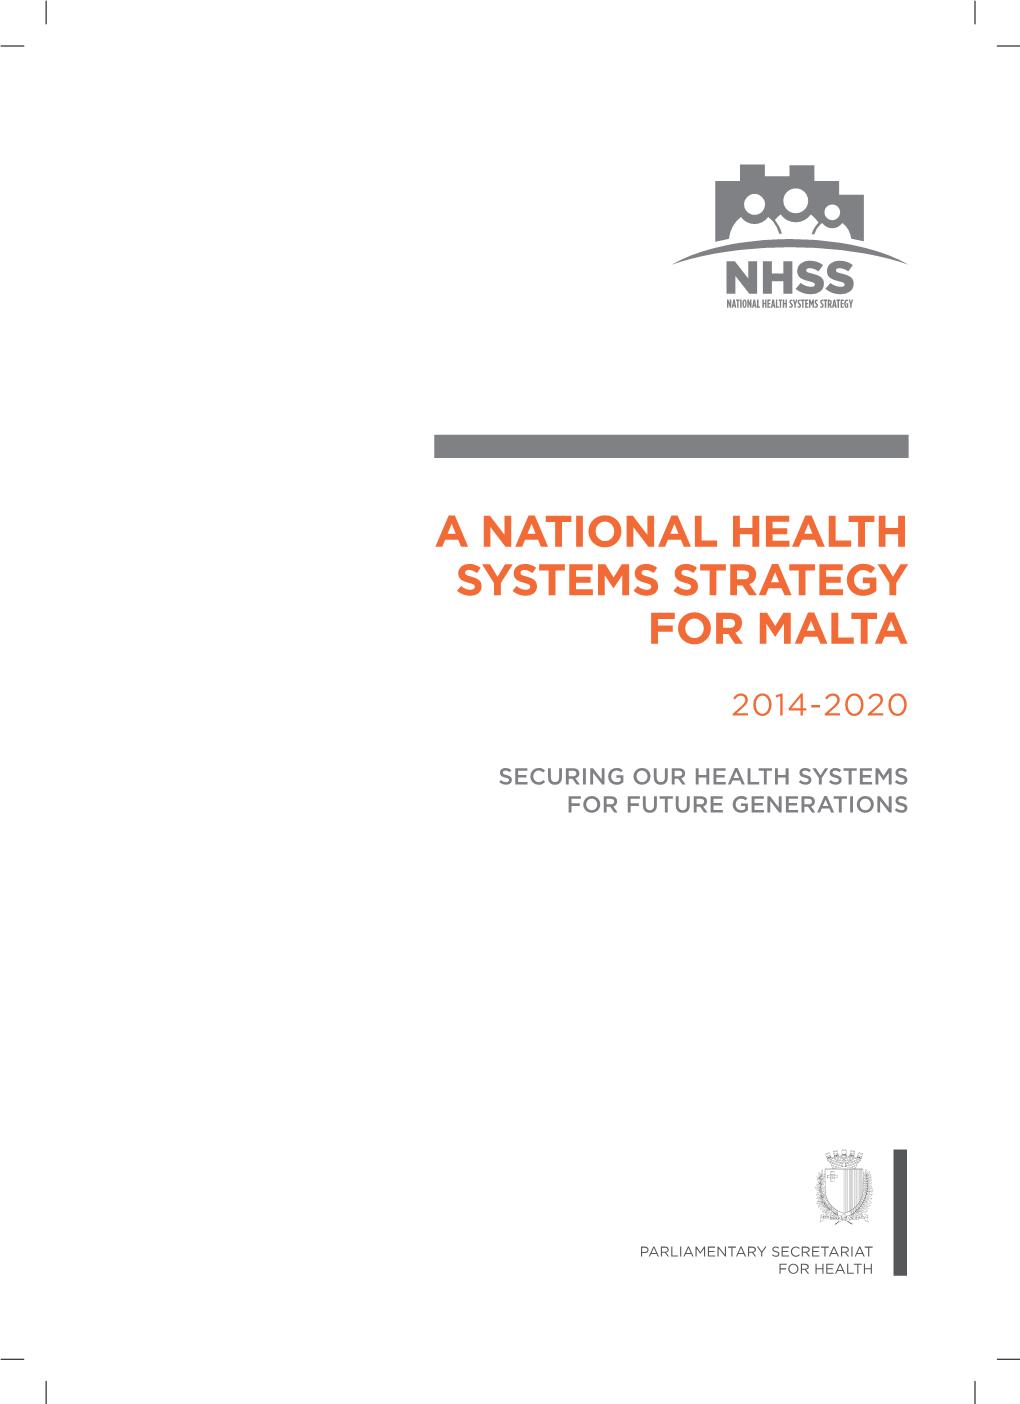 A National Health Systems Strategy for Malta